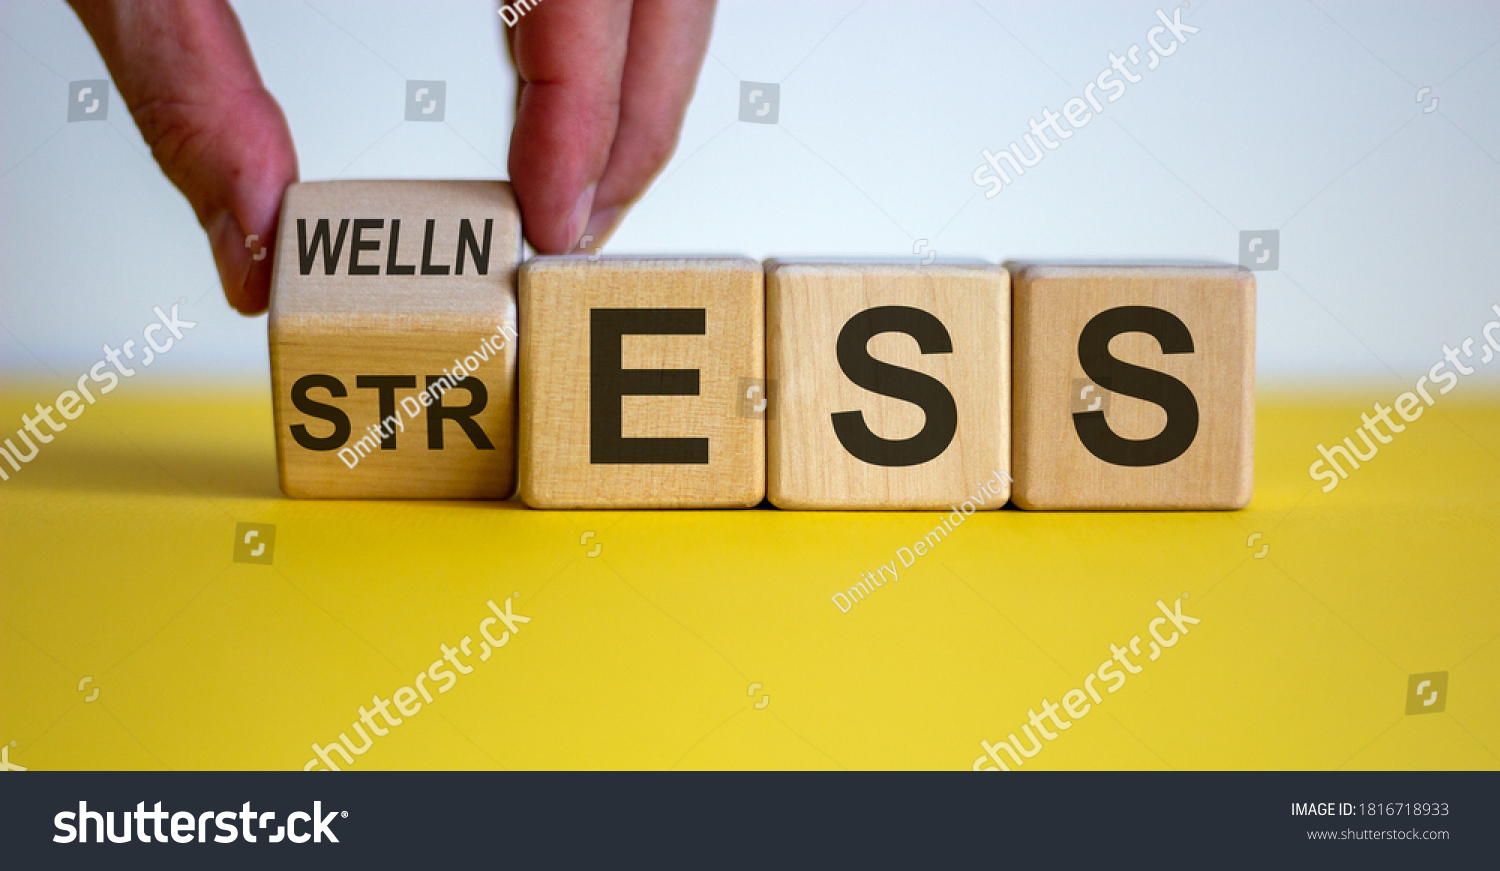 Wellness instead of stress. Hand turns a cube and changes the word 'stress' to 'wellness'. Beautiful yellow table, white background. Concept. Copy space. #1816718933